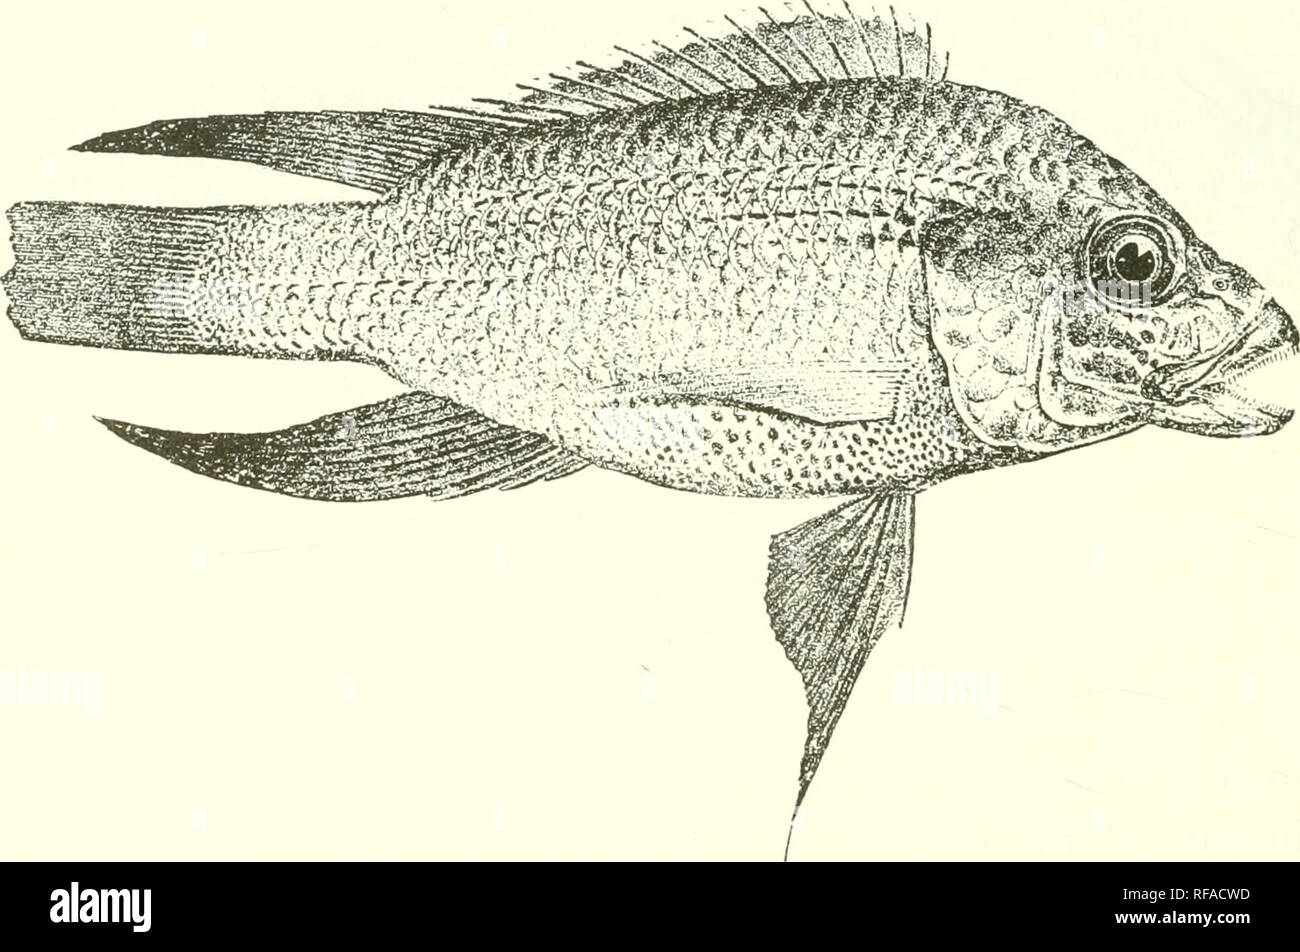 . Catalogue of the fresh-water fishes of Africa in the British Museum (Natural History). Fishes; Freshwater animals. 156 CICHLID.E. 30-33'^&quot;J; lateral lines jj^[-^. Brownish, olive, or blackish; vertical fins and ventrals blackish; dorsal and caudal edged with yellowish (red]). Total length 360 niillim. East Africa to Natal. Types in Berlin Museum. Sir J. Kirk (P.). Prof. VV. Peters (P.). Dr. Percy Kendall (C.) ; Sir h&quot; H. Johnston (P.). Dr. E. Wurren (P.). Mr. T. Ayres (C). Kev. N. Abraham (P.). 1-2. Ad. Zanzil)ar Coast. 3-4. Two of the Zanibesi. typos. 5. Ad. Ul)por Shire R. 6. Ad. Stock Photo